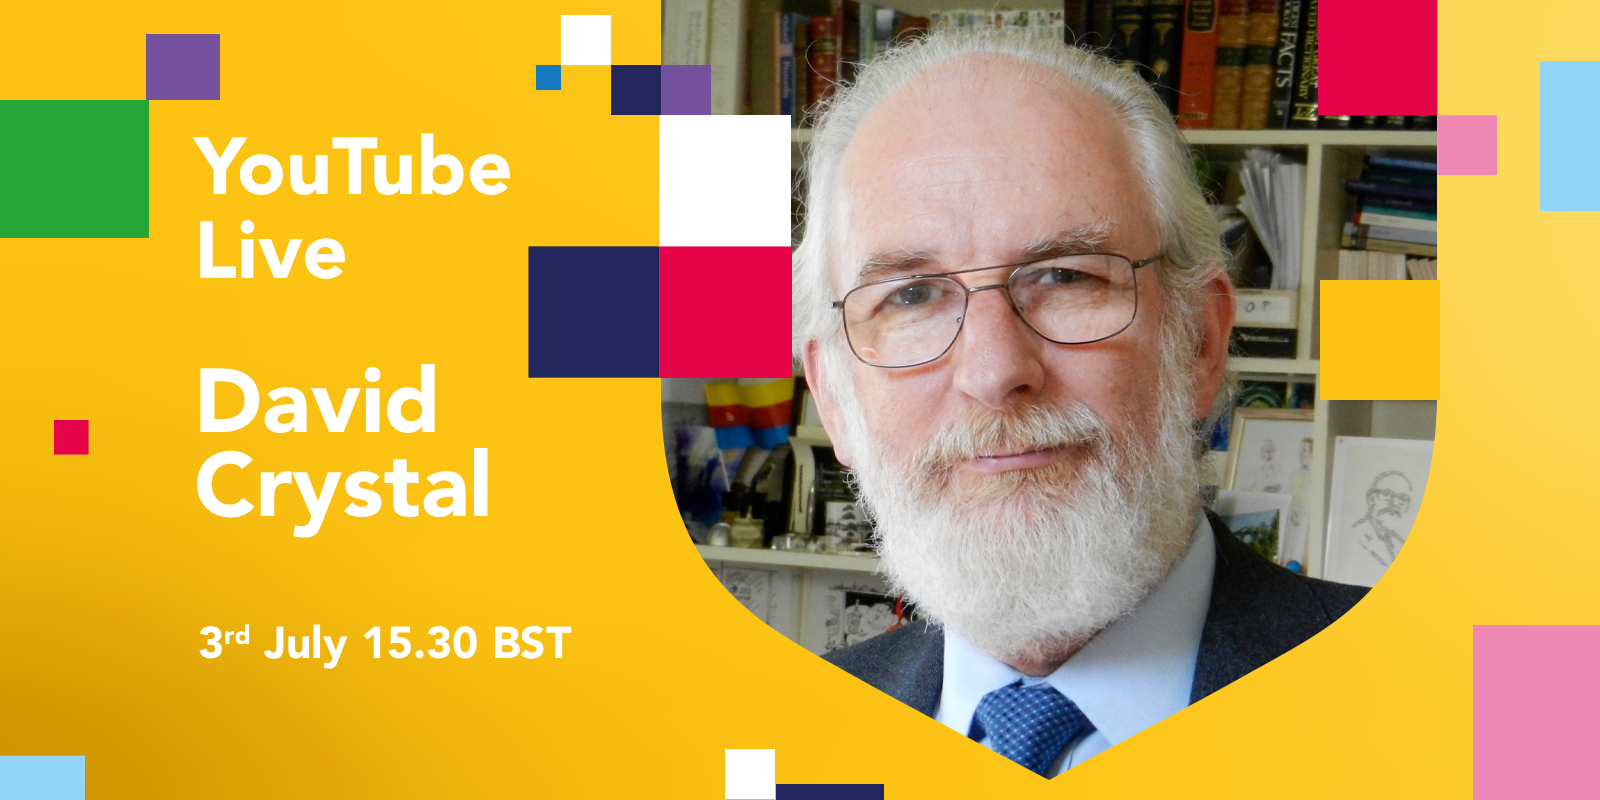 YouTube Live with David Crystal